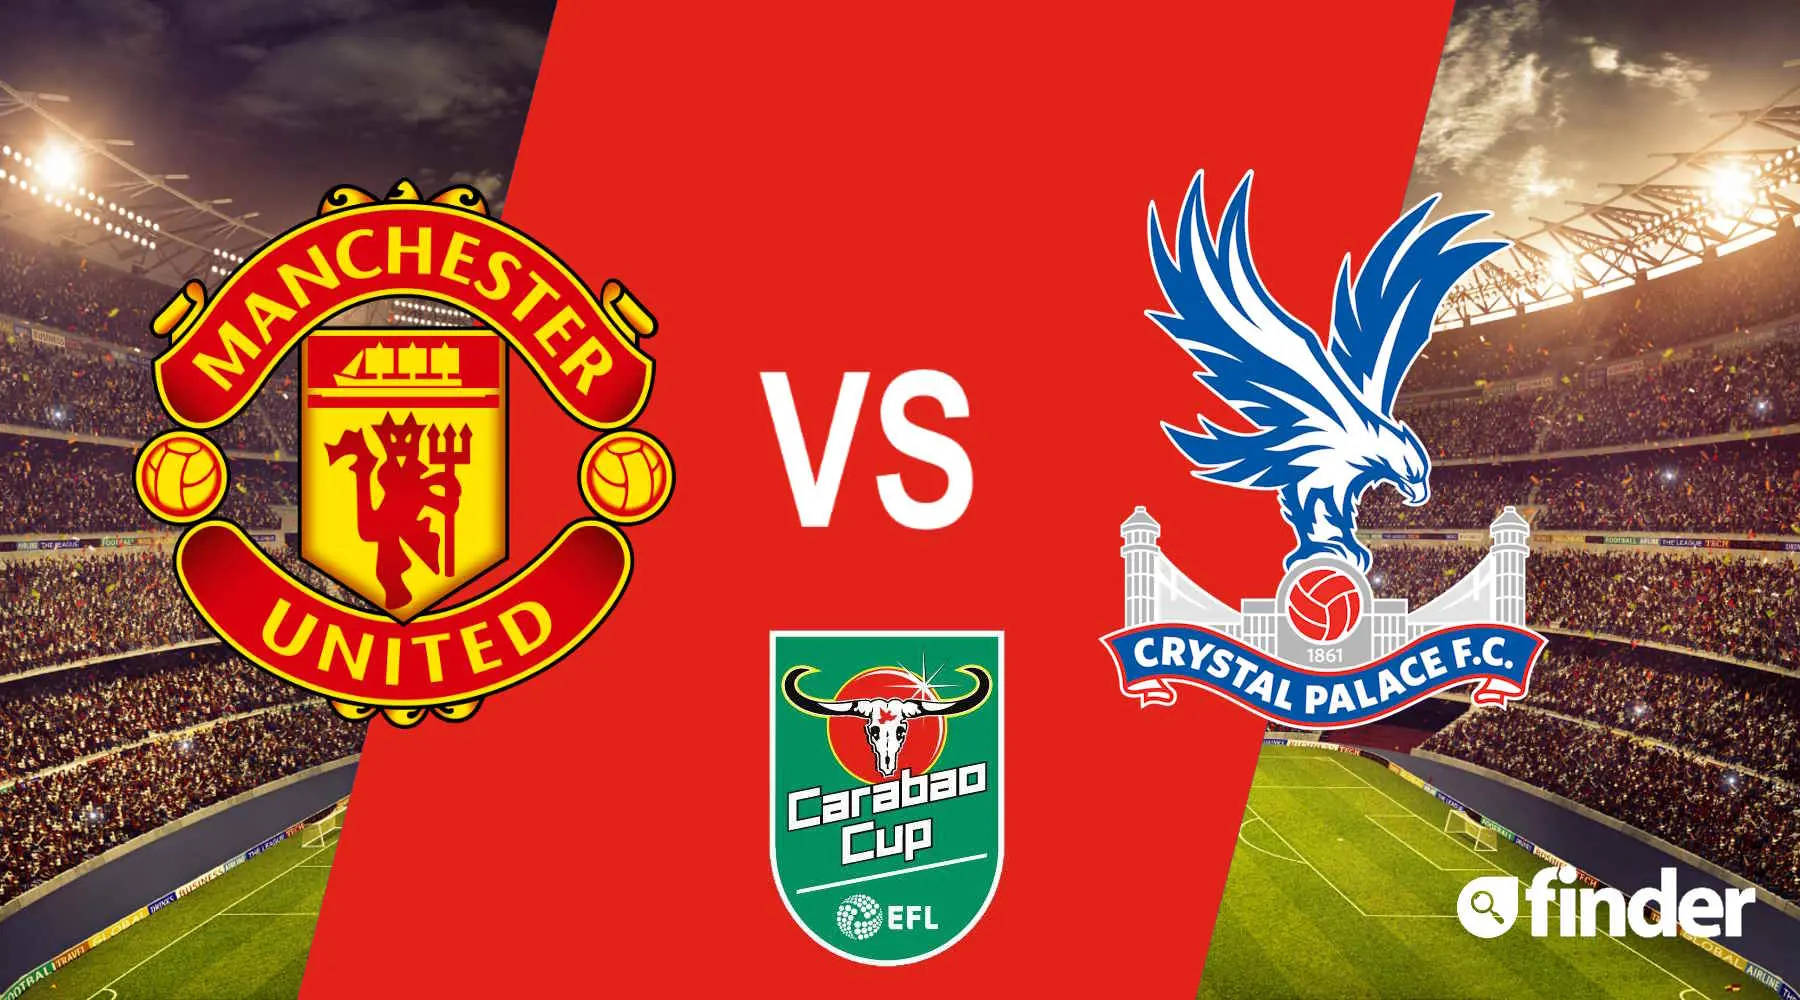 How to watch Man United vs Crystal Palace Carabao Cup live and free